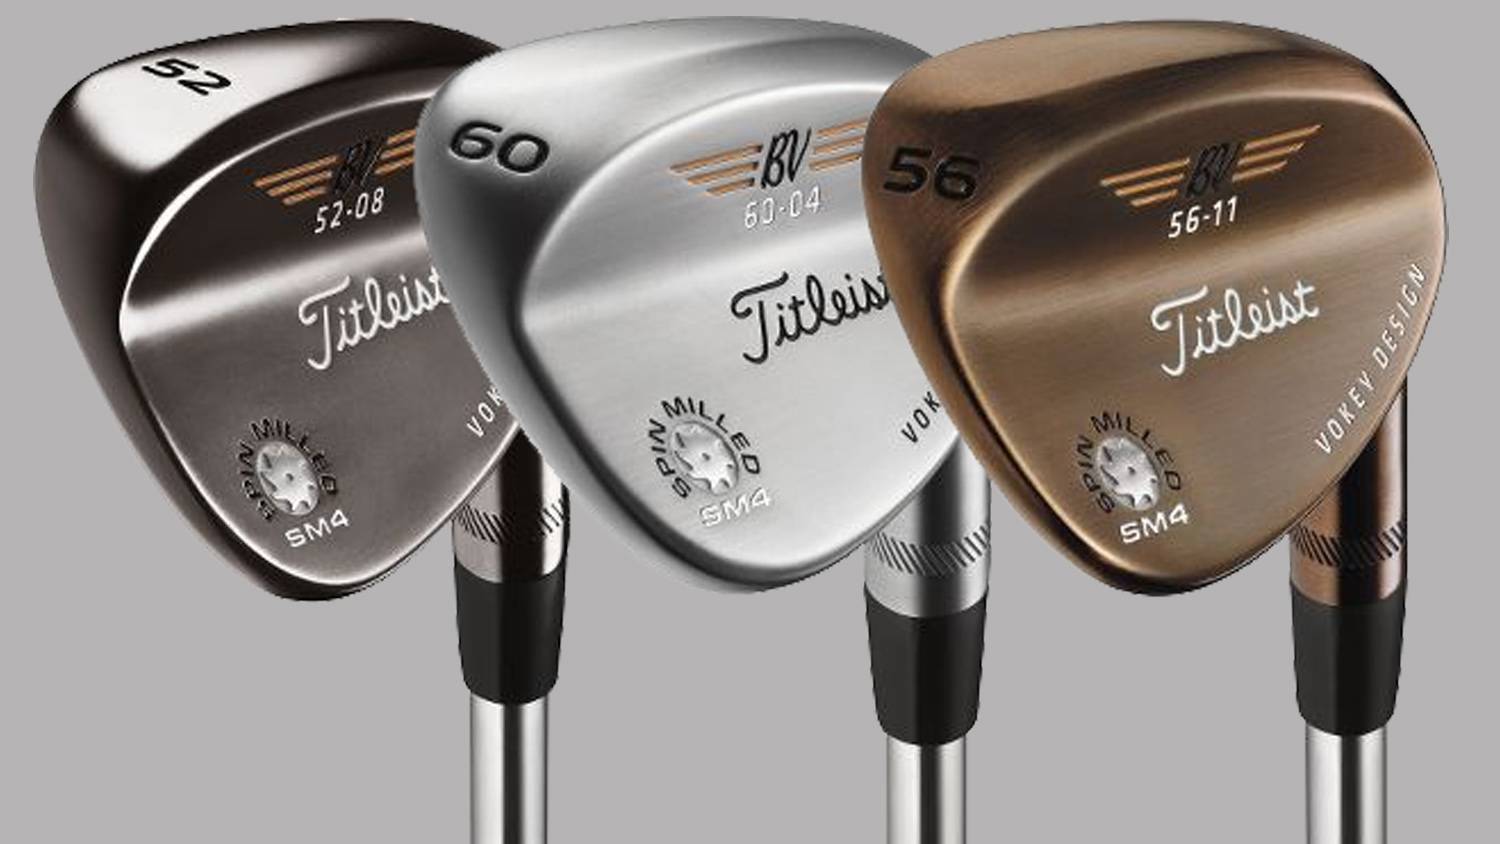 Equipment: New Titleist Vokey Design SM4 Wedges - The Globe and Mail